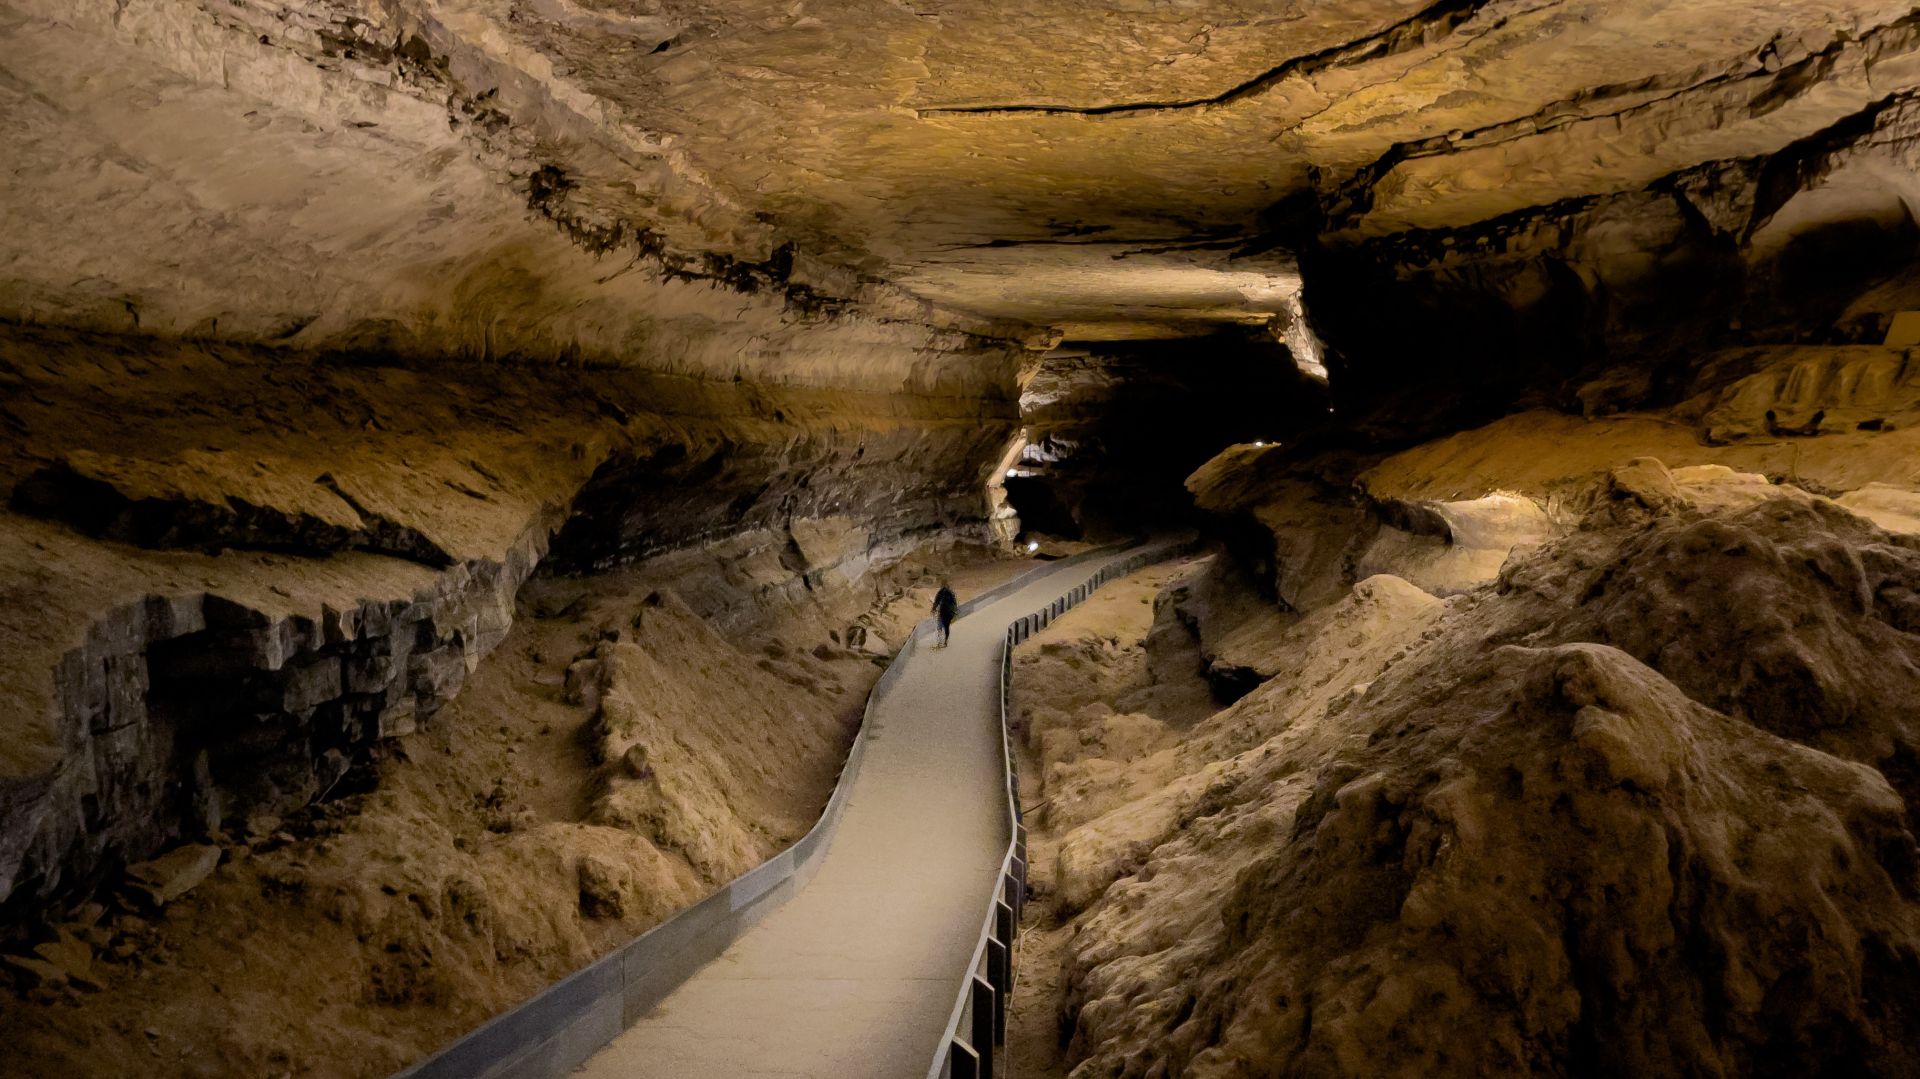 <p>                     If you’re heading down to south-central Kentucky, take a tour of these mammoth-sized caves with a park ranger. Not only is the cave system here twice as long as the next longest one (in Mexico), it might be even longer than we think. Some 400 miles of it have already been mapped out, but geologists think there may be another 200 miles of undiscovered cave system to go.                    </p>                                      <p>                     Most of the tours take around two hours so you can learn all about the fascinating subterranean geology between breakfast and lunch.                   </p>